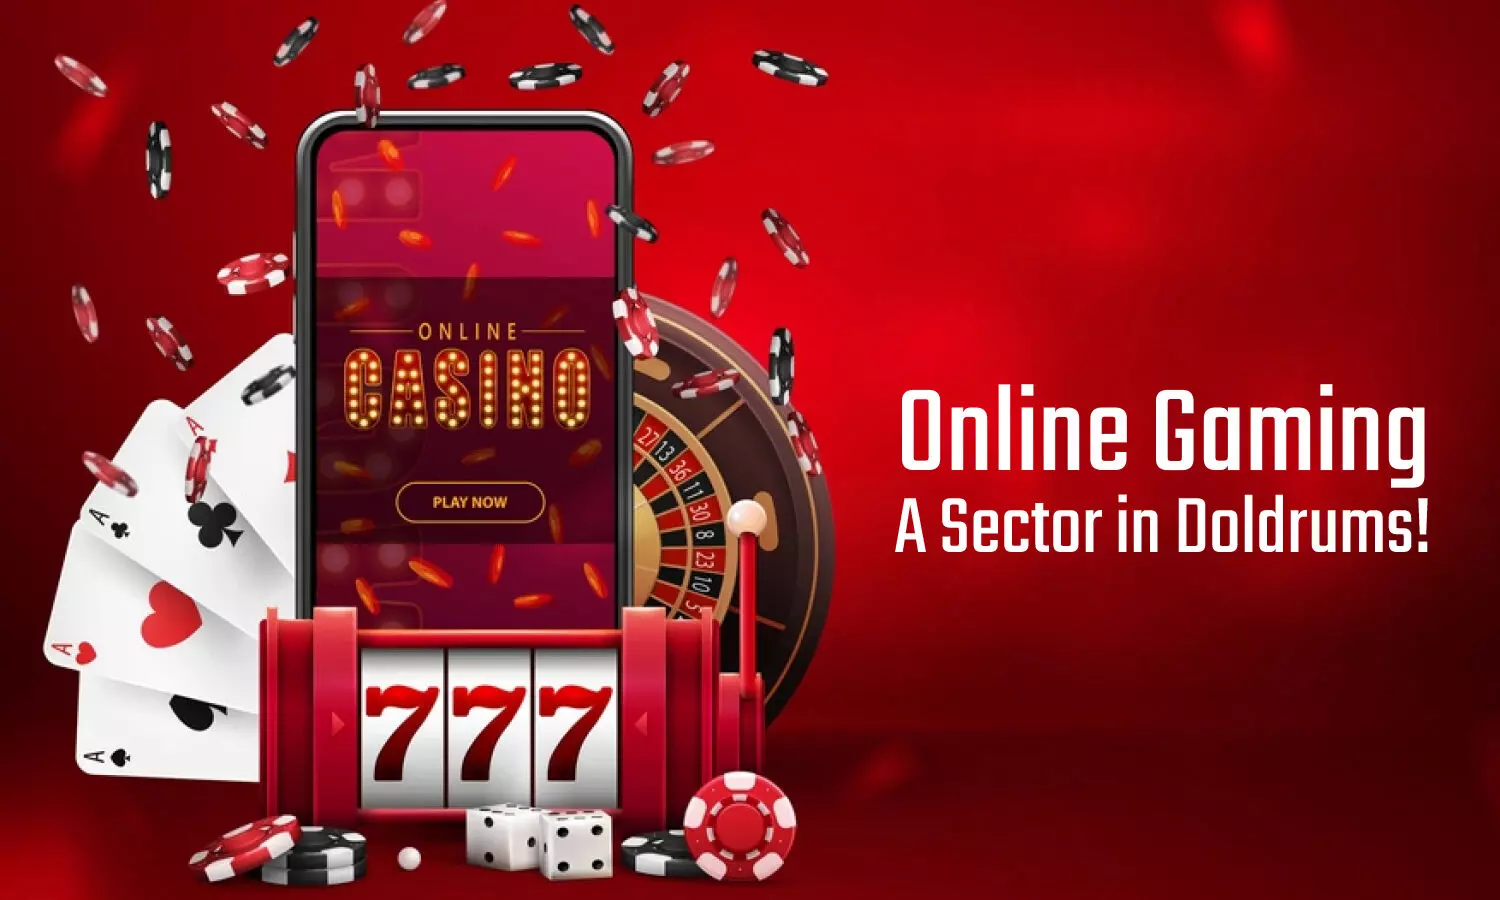 Online Gaming A Sector in Doldrums